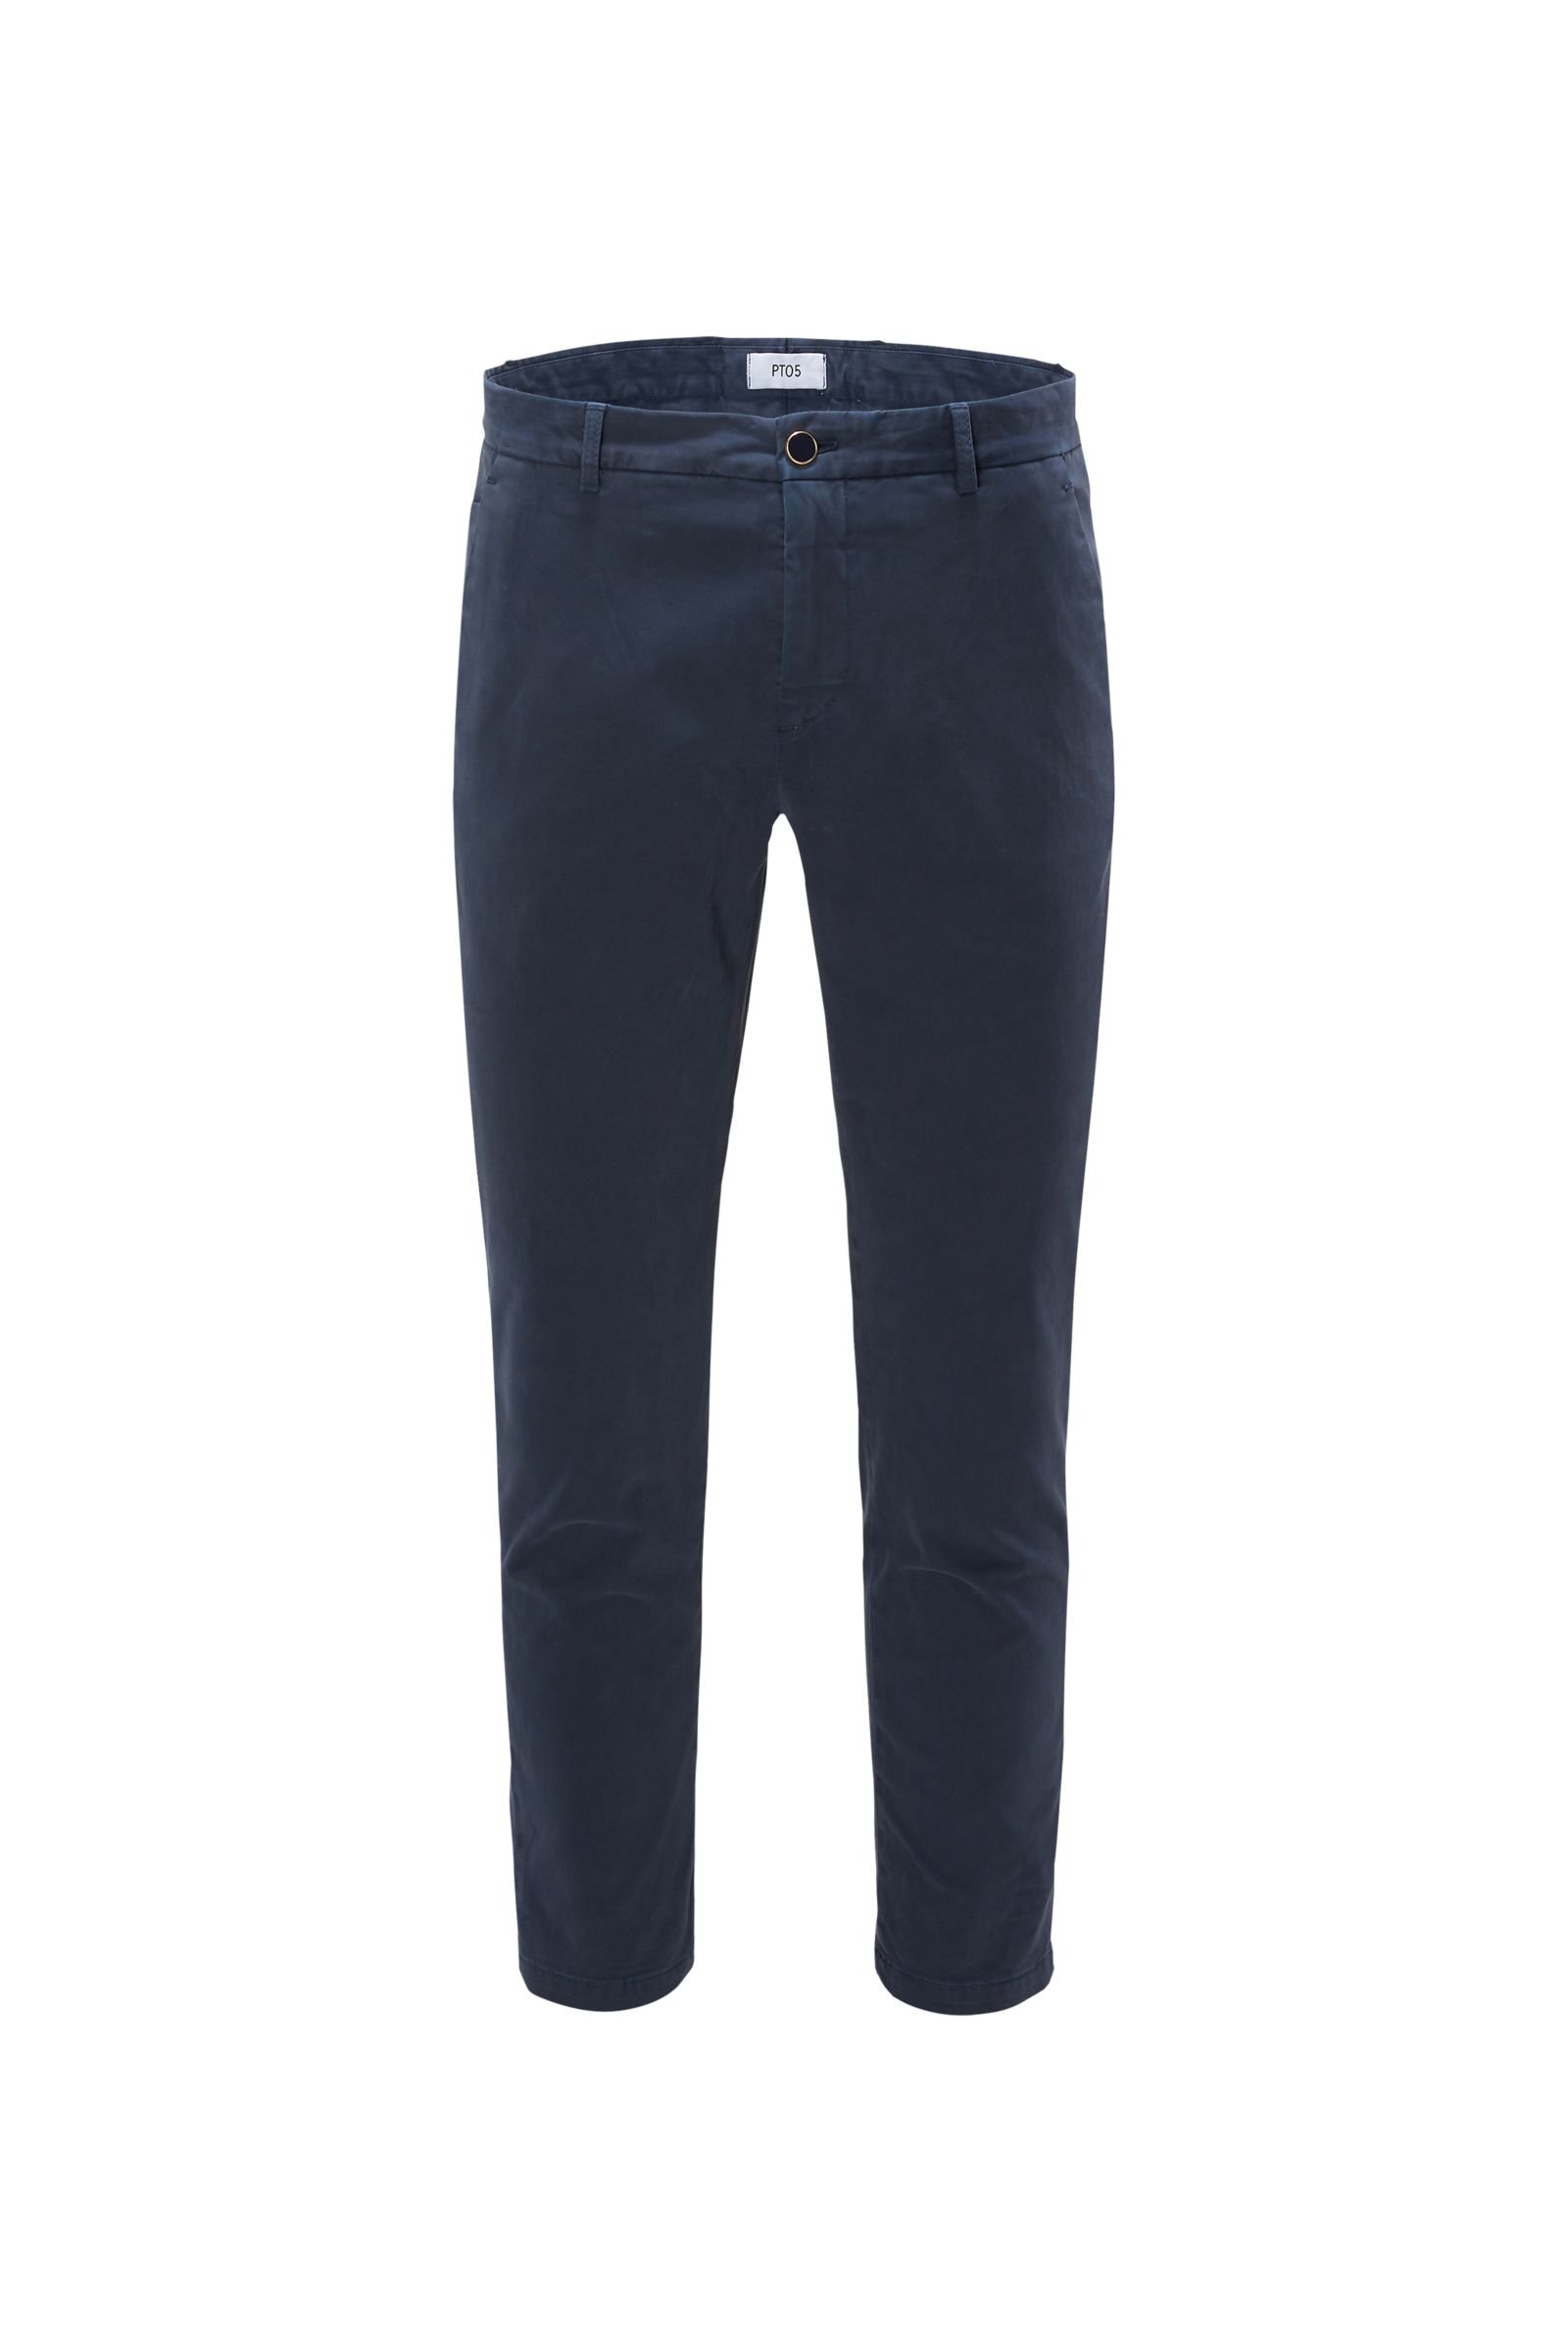 Cotton trousers 'Jungle Shaped Fit' navy